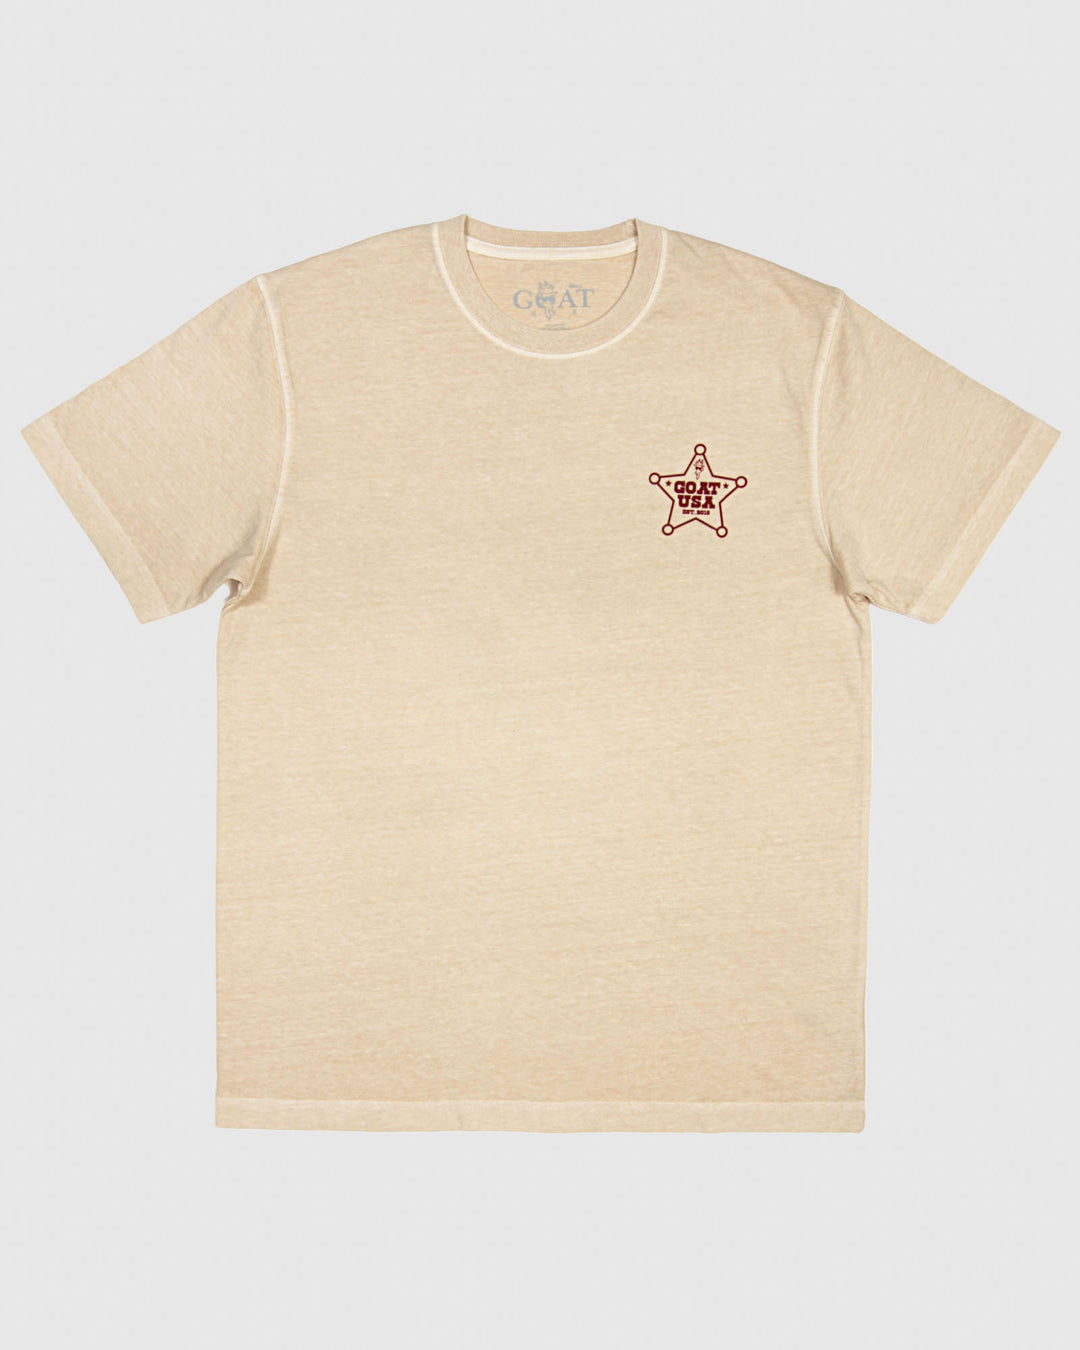 Sandshell-colored t-shirt with sheriffn badge on left chest